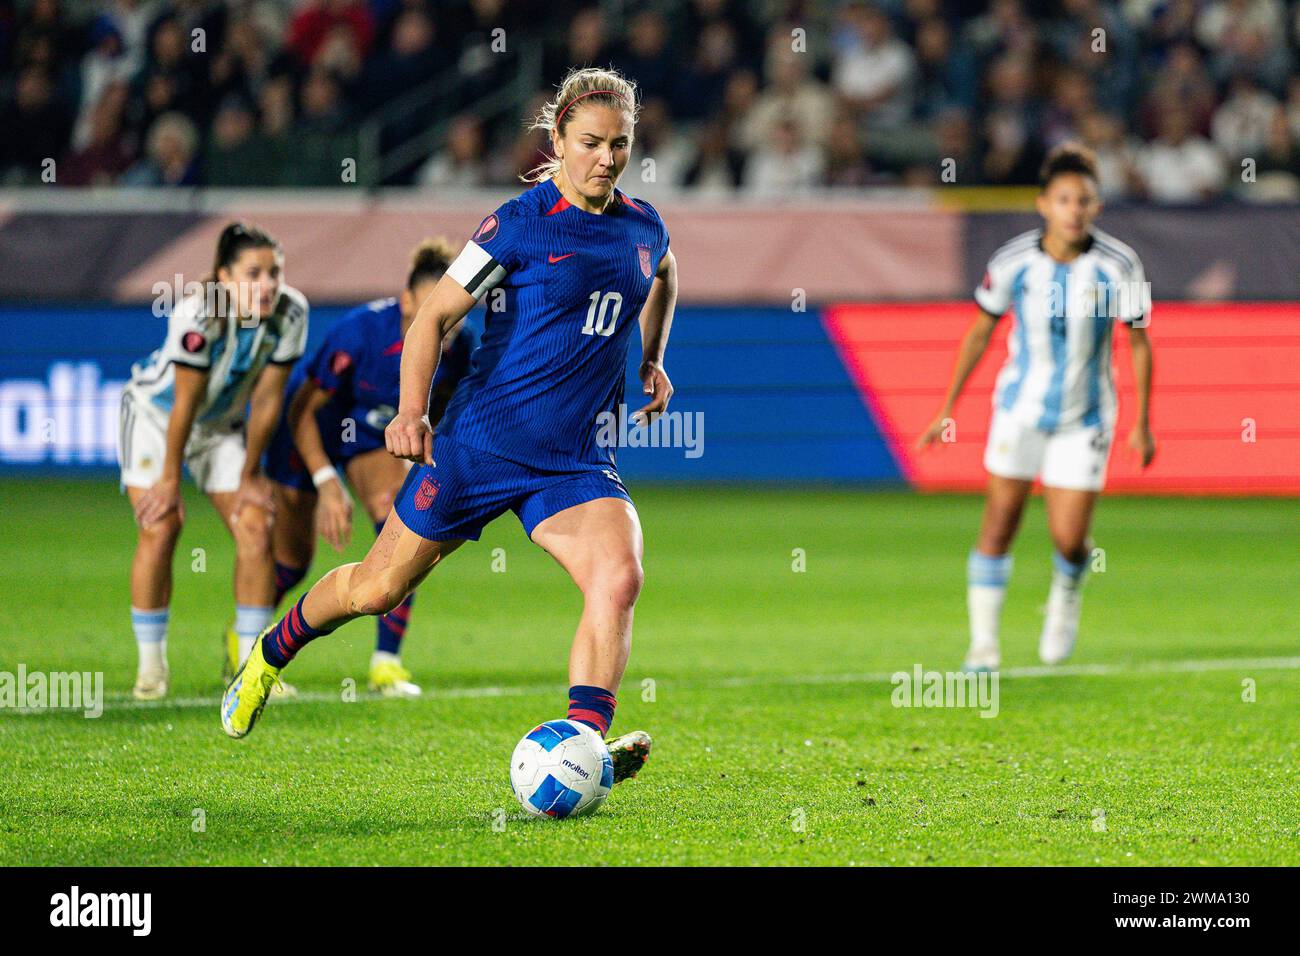 United States midfielder Lindsey Horan (10) scores on a penalty kick during the Concacaf W Gold Cup Group A match against Argentina, Friday, February Stock Photo